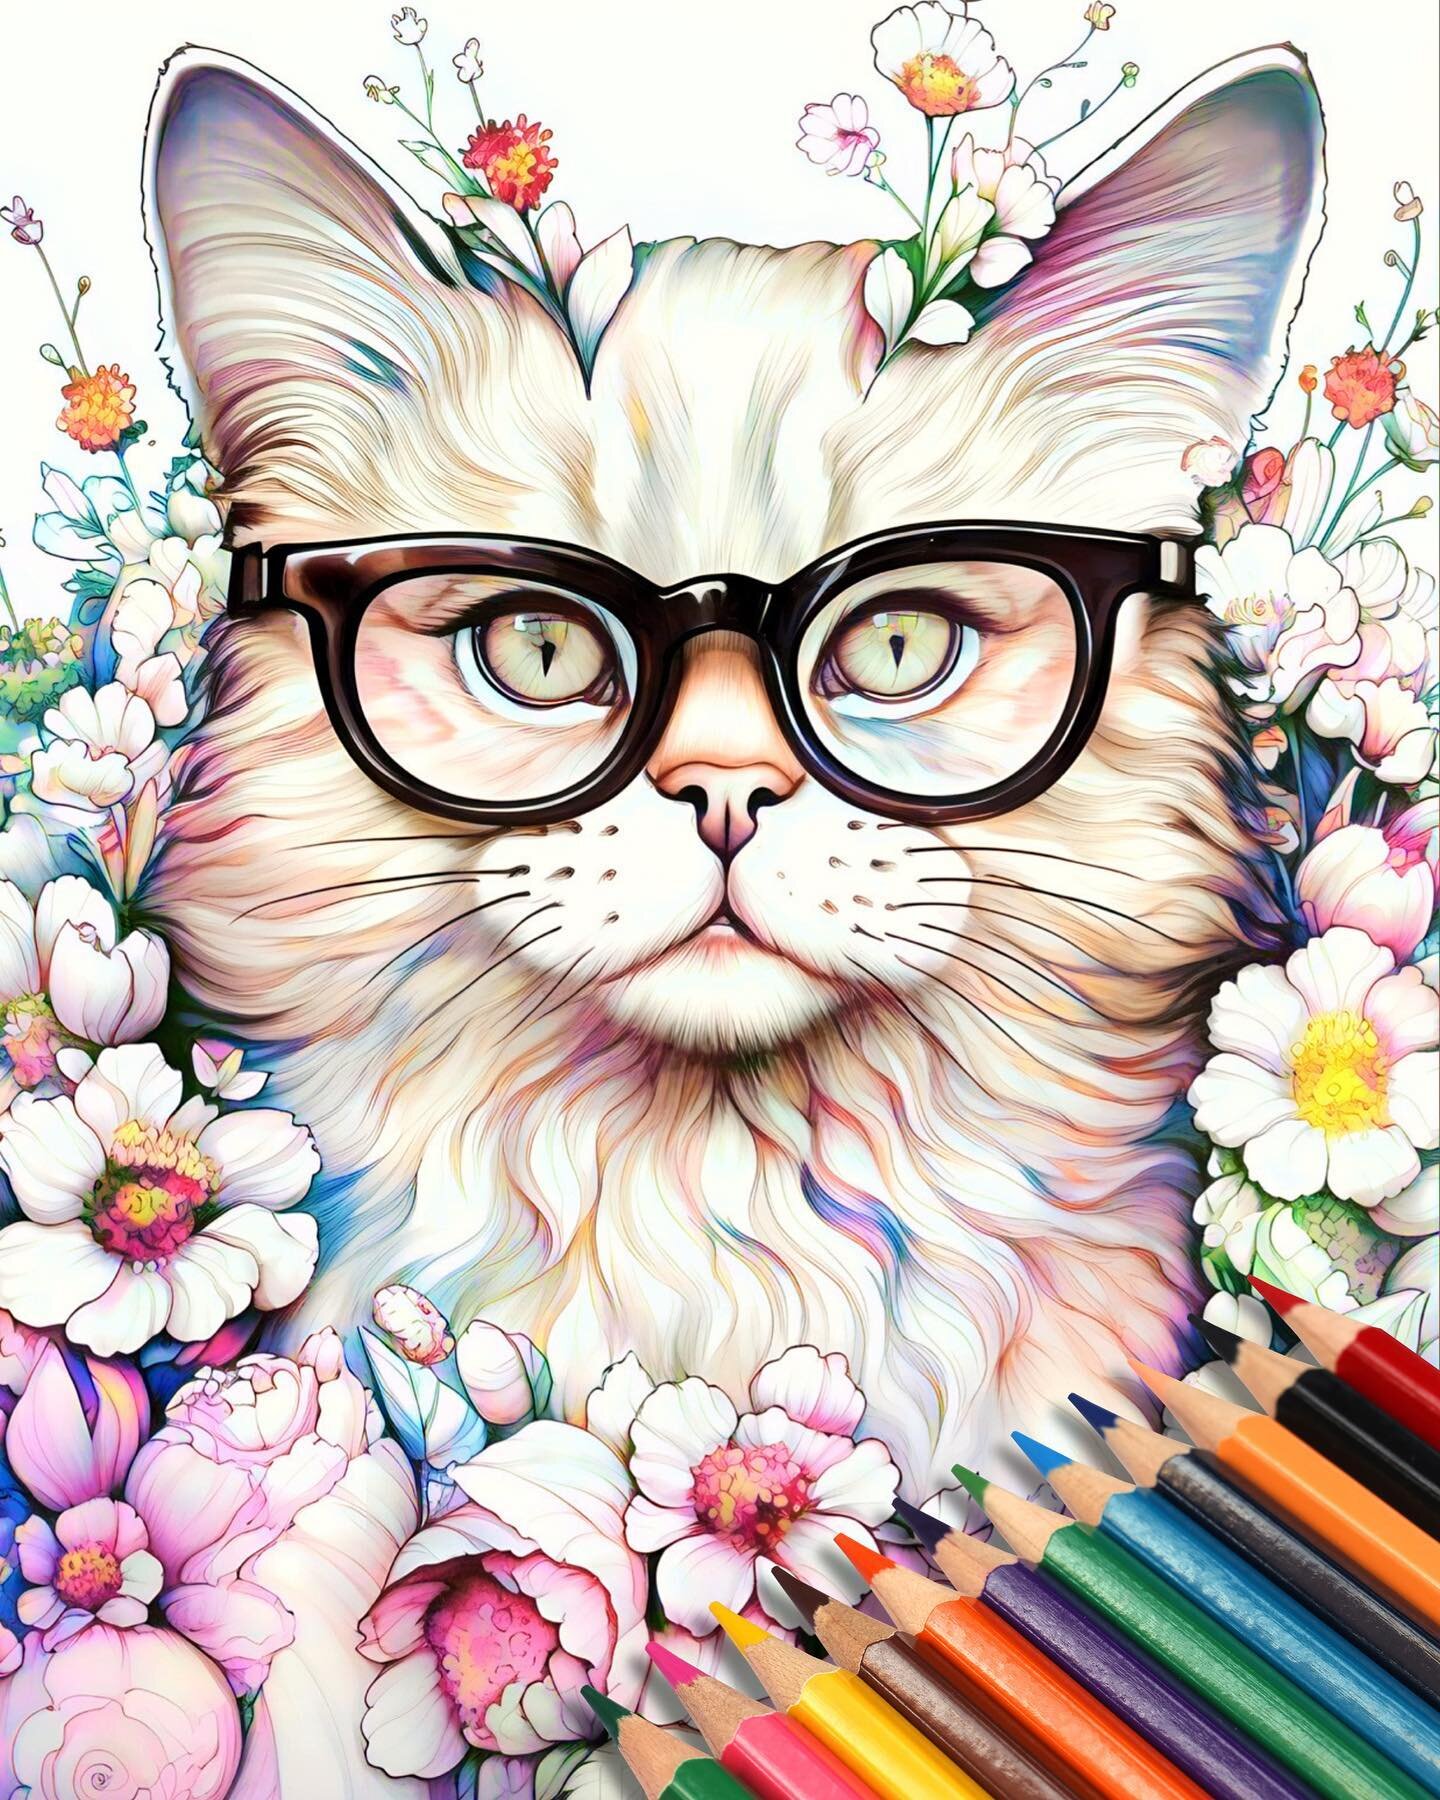 from Cats in Glasses 👓 coloring book on Amazon links on bio 💫
.
.
.
.
.
.
.
.

#coloring #coloringbook #colouring #colouringbook #adultcoloringbook #adultcoloring #coloringforfun #coloringaddict #coloringforadults #coloringtherapy #wonderfulcolorin